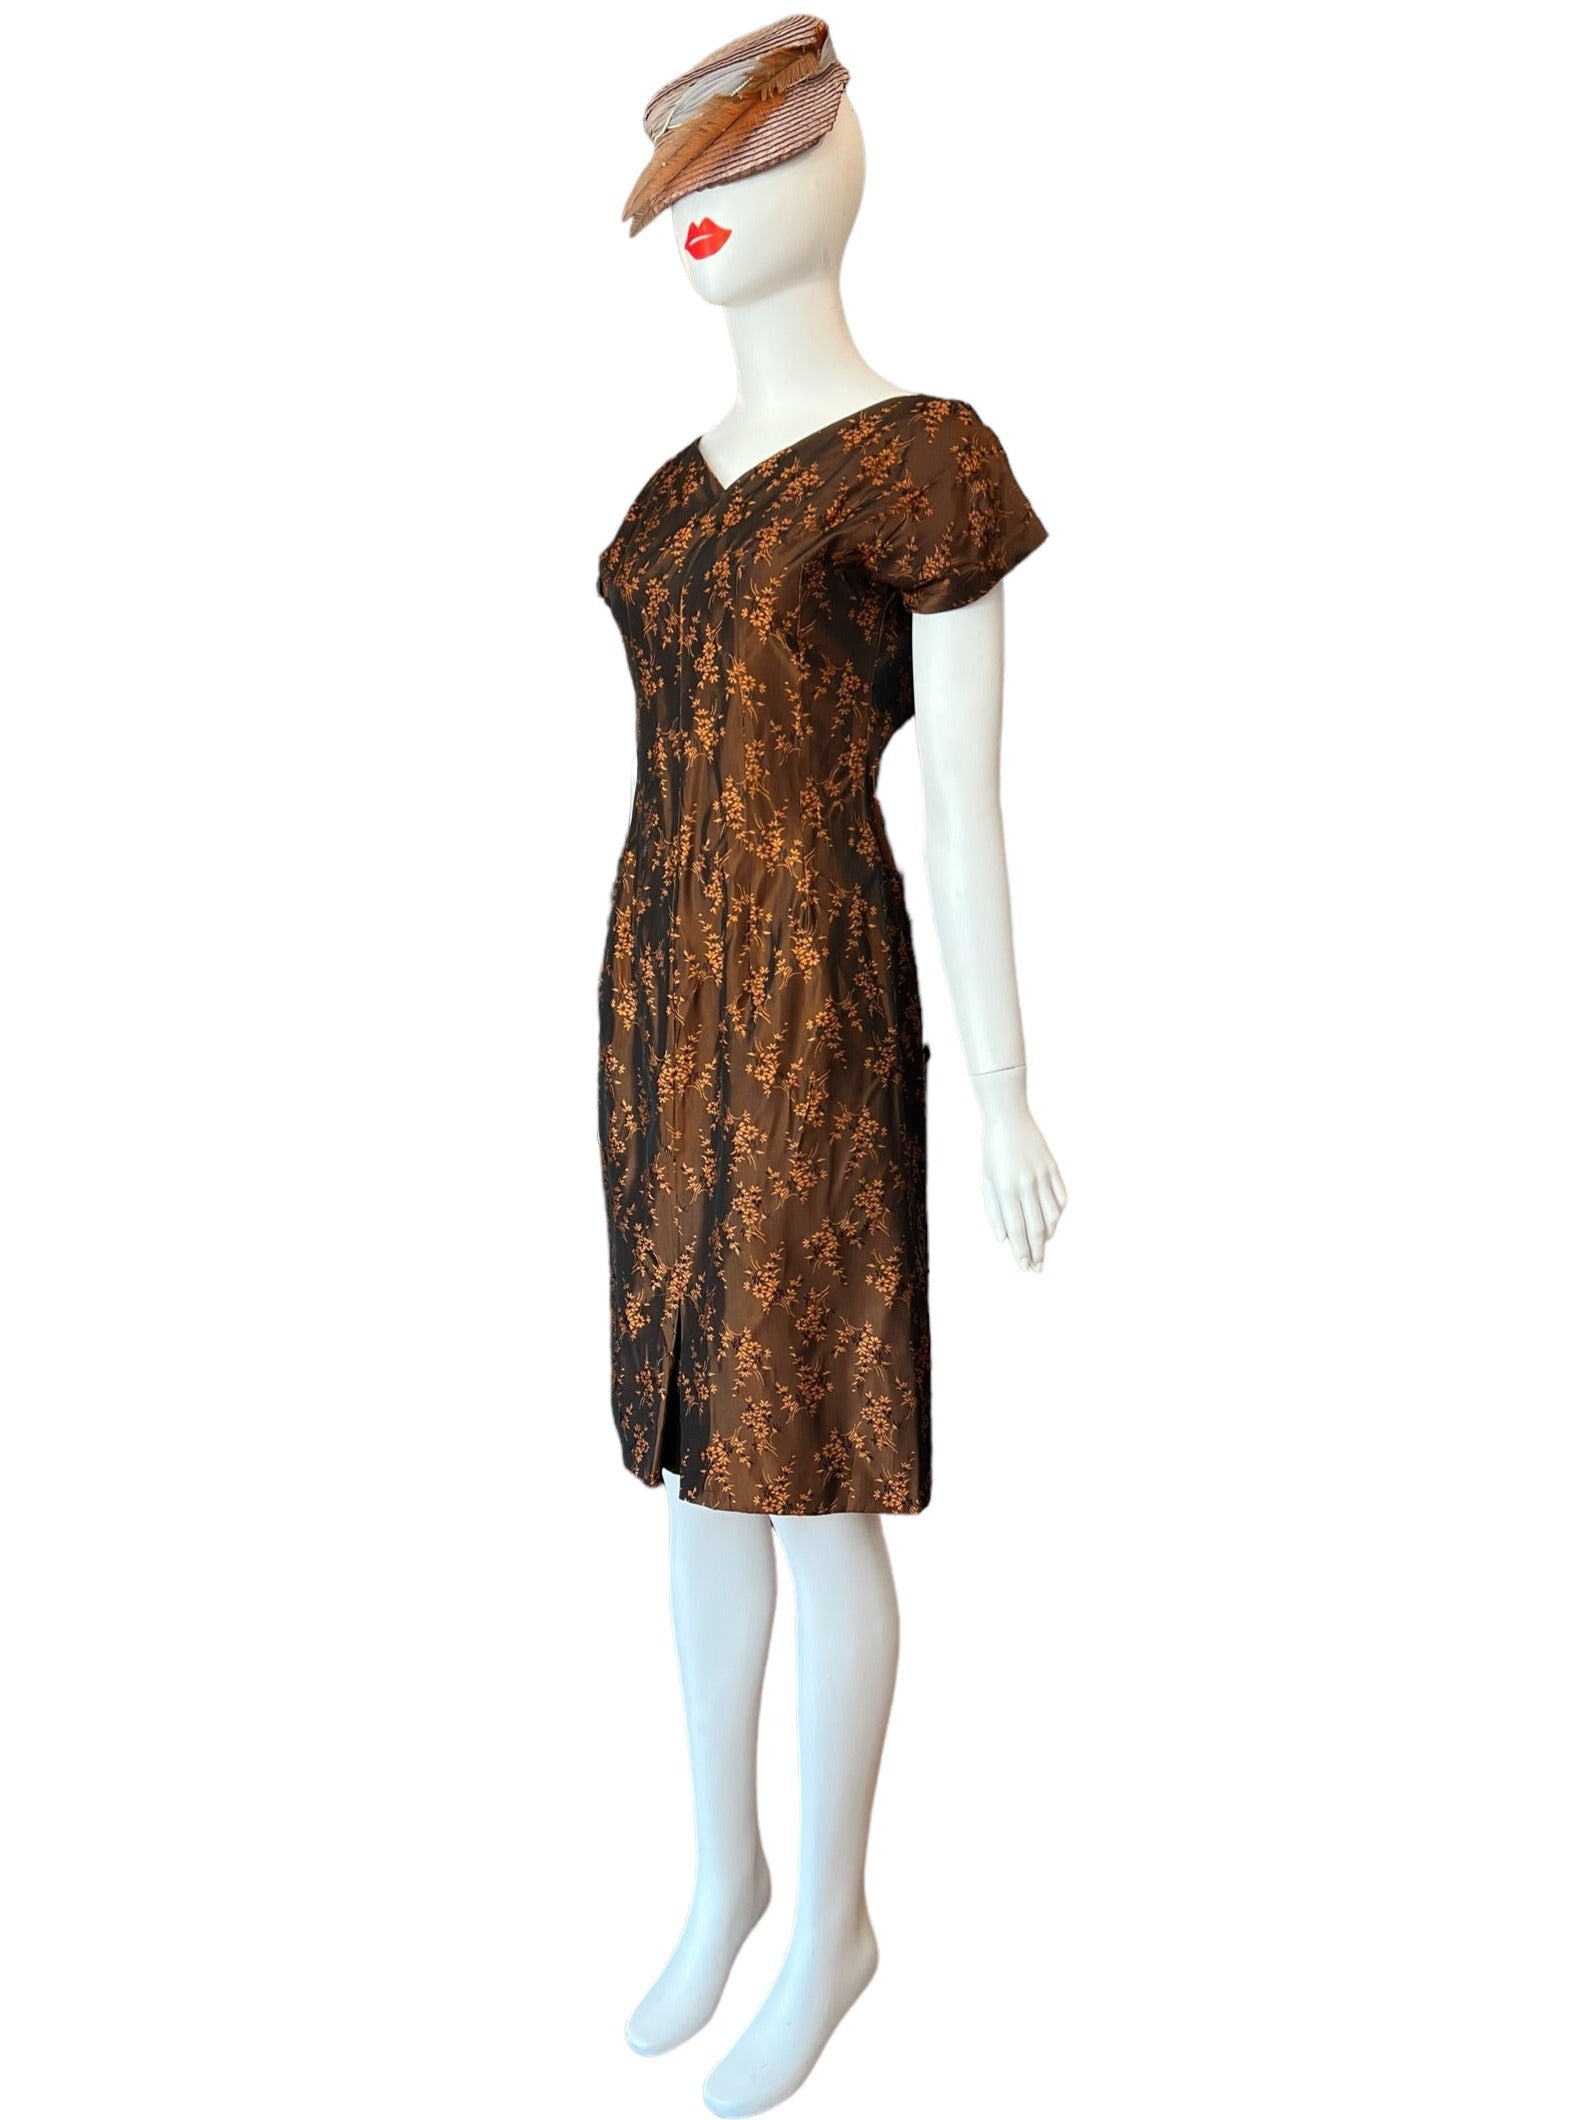 Rust colored bronze irridescent 50's dress handmade one of a kind vintage cocktail style